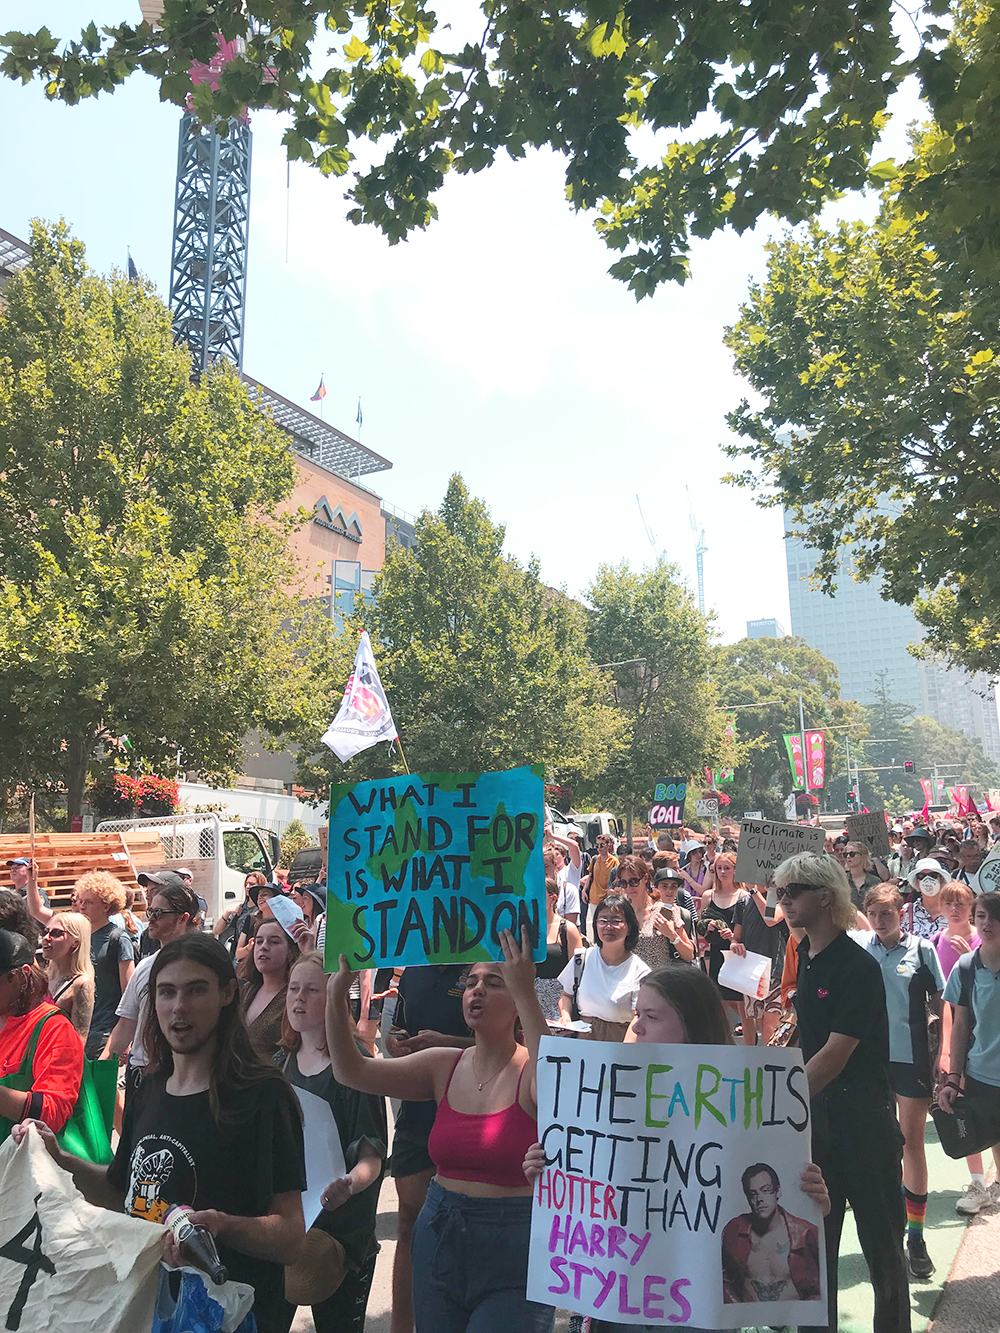 Protestors make their way along Williams Street, With two posters in shot. One reads "What I stand for is what I stand on" and another reads "The earth is getting hotter than Harry Styles." 